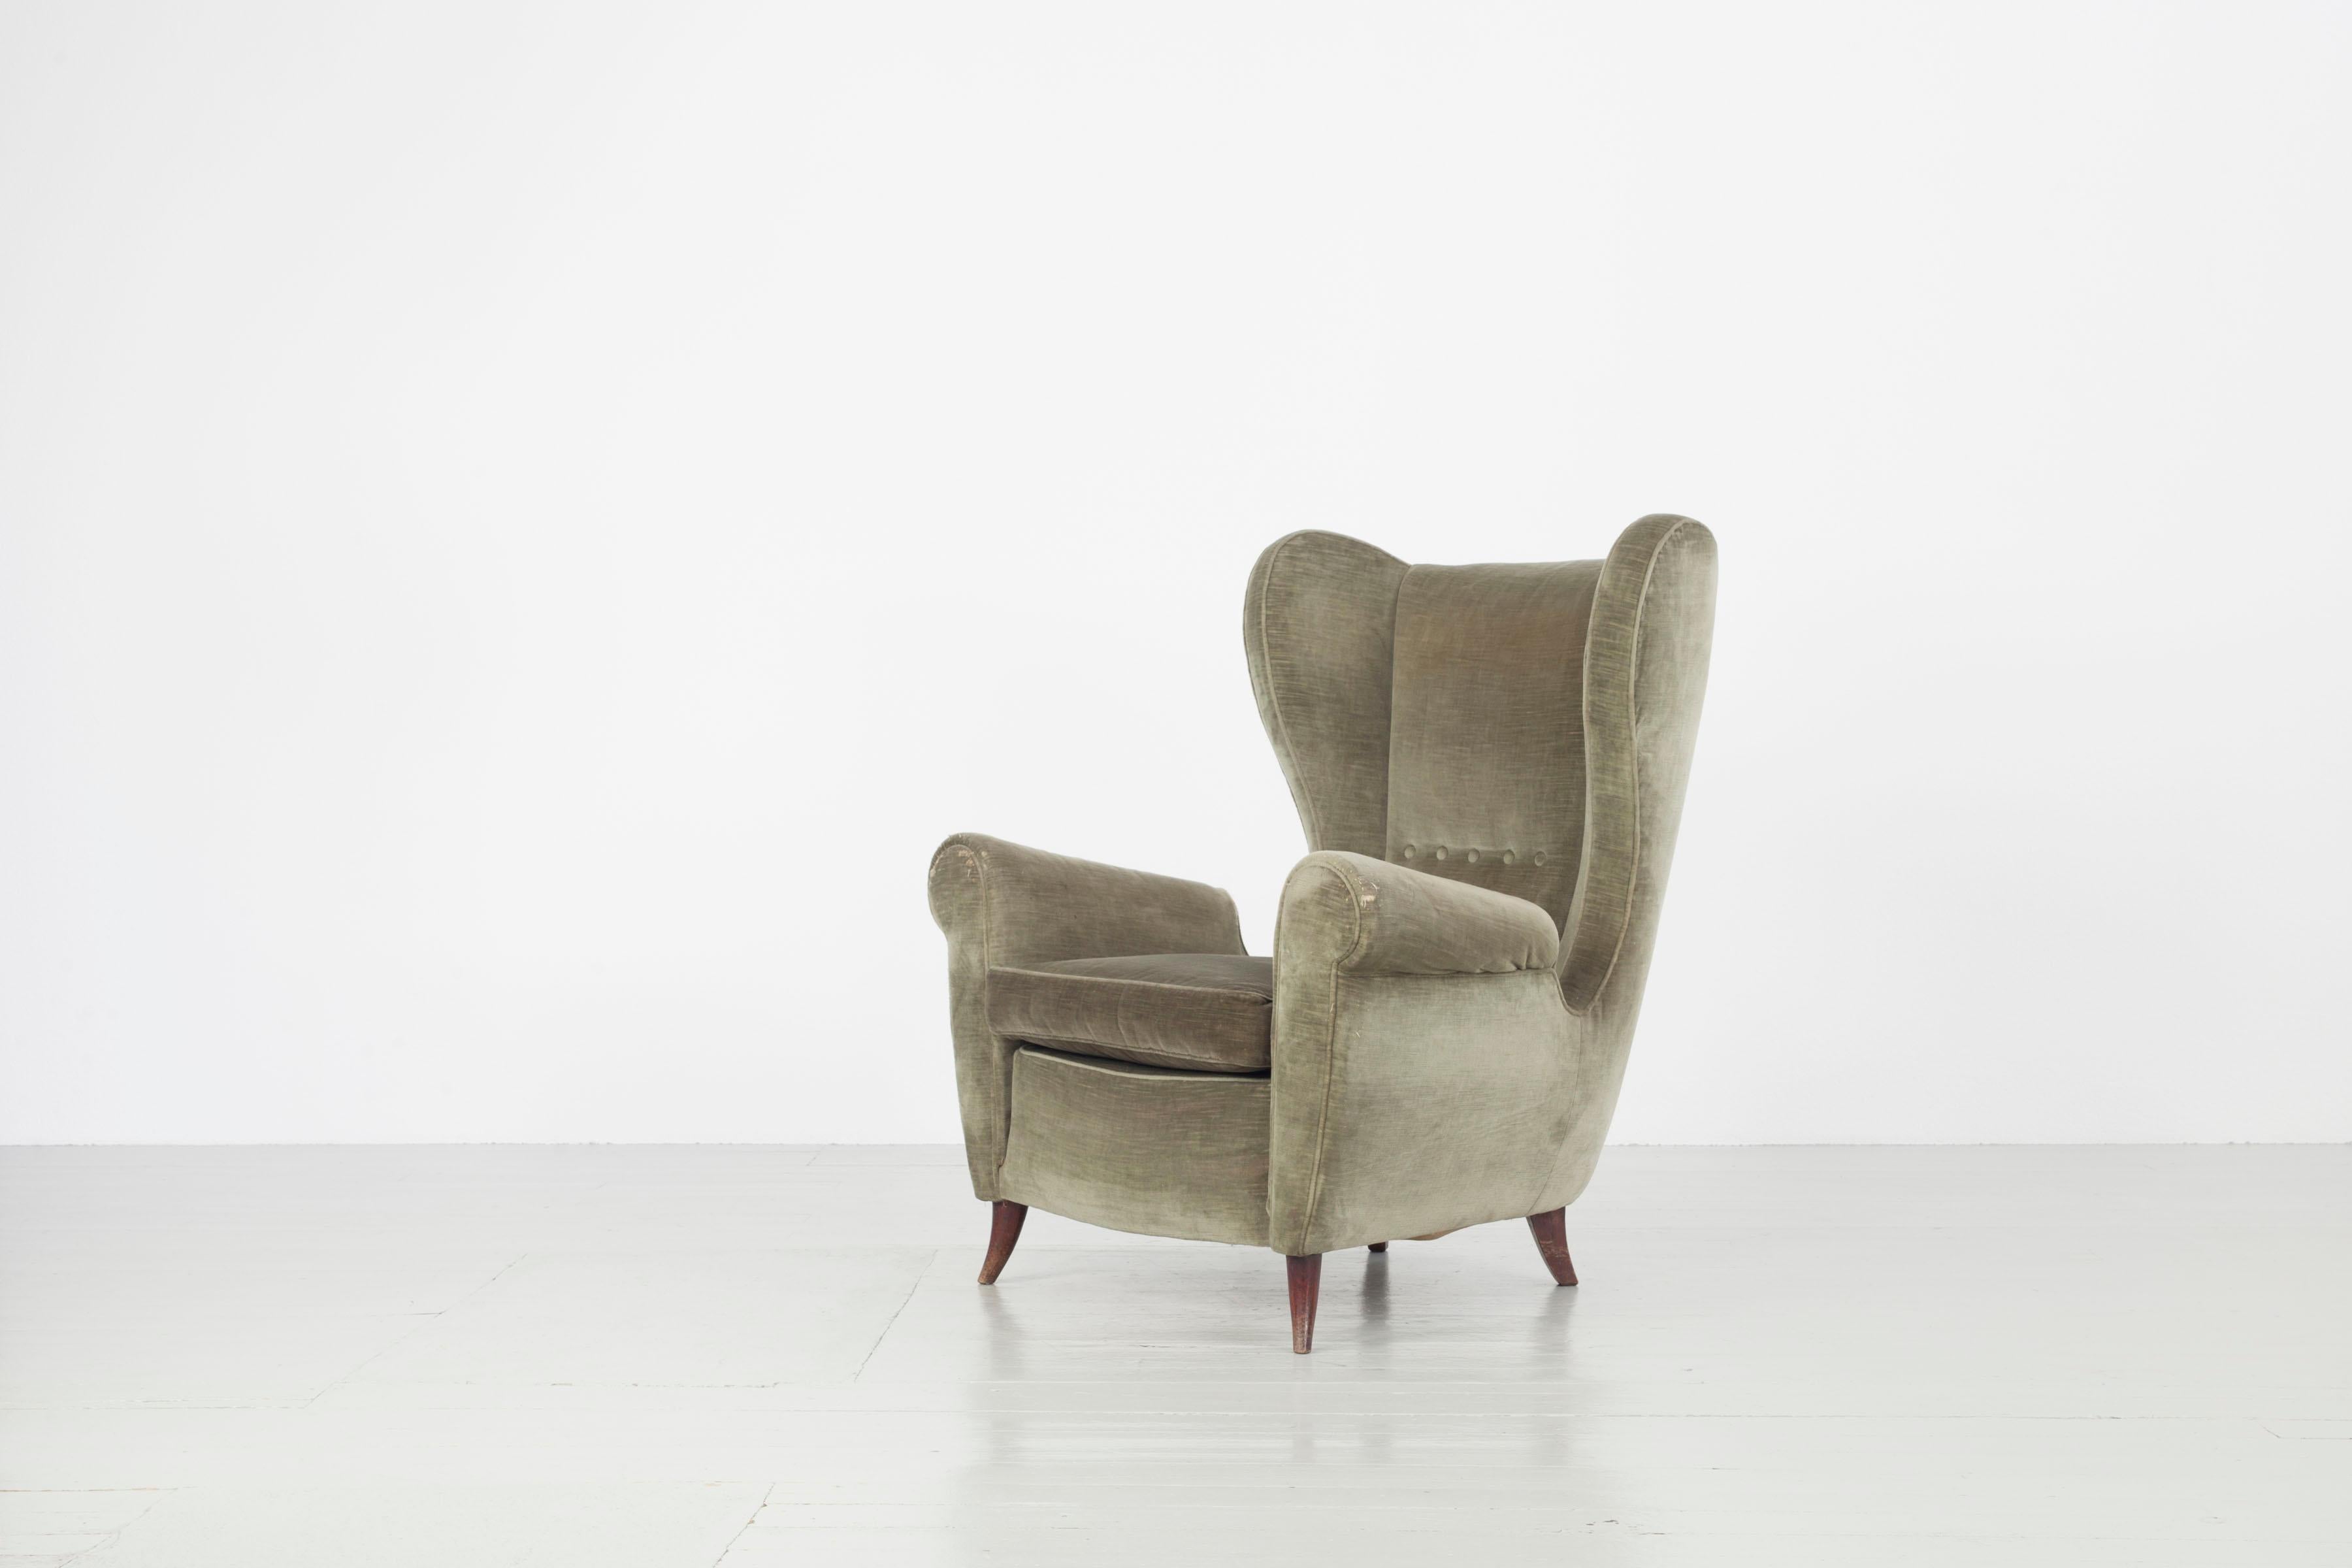 Set of Two Italian Armchairs in Original Upholstery of Brown and Green, 1950s For Sale 4